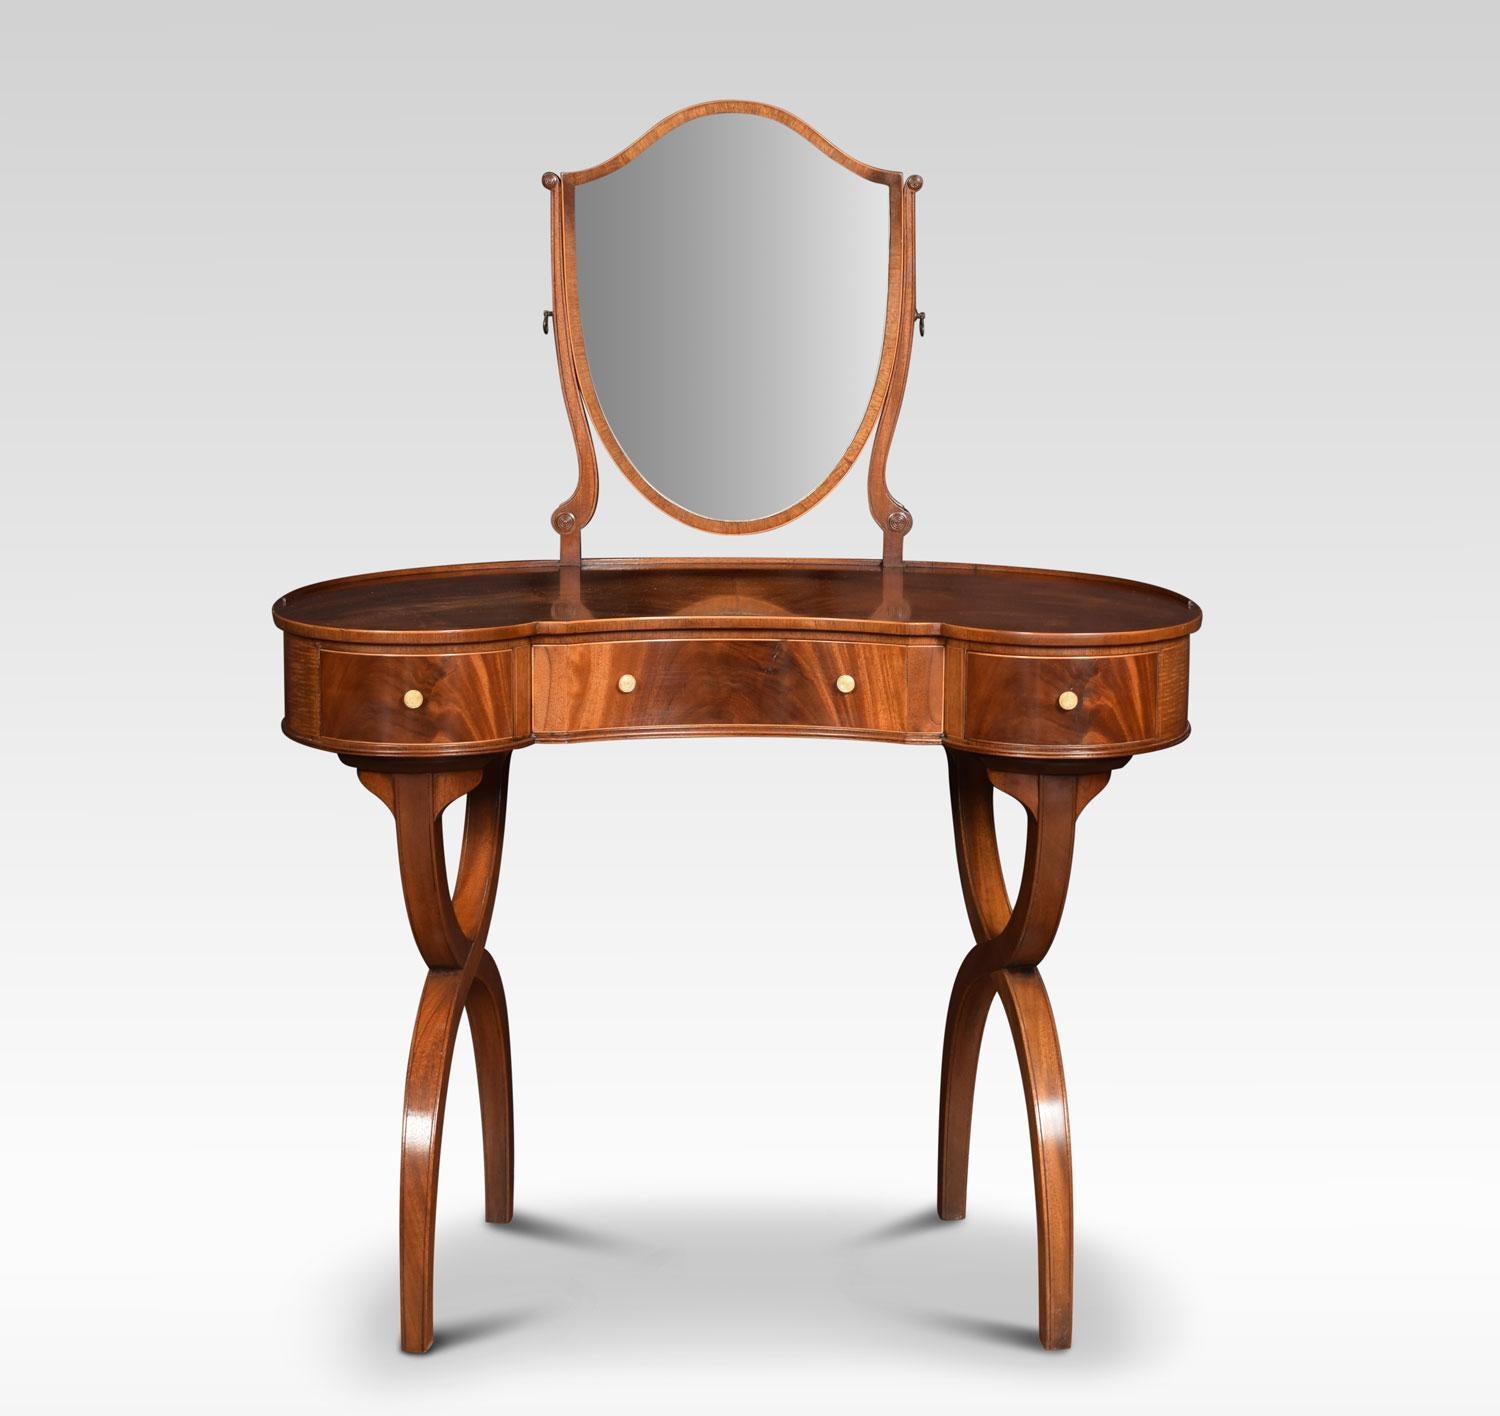 Mahogany kidney shaped lady’s dressing table, the shield shaped adjustable mirror supported on slender mahogany supports. To the well figured kidney shaped top. The dressing table fitted with three freeze draws with knob handles. All raised up on x